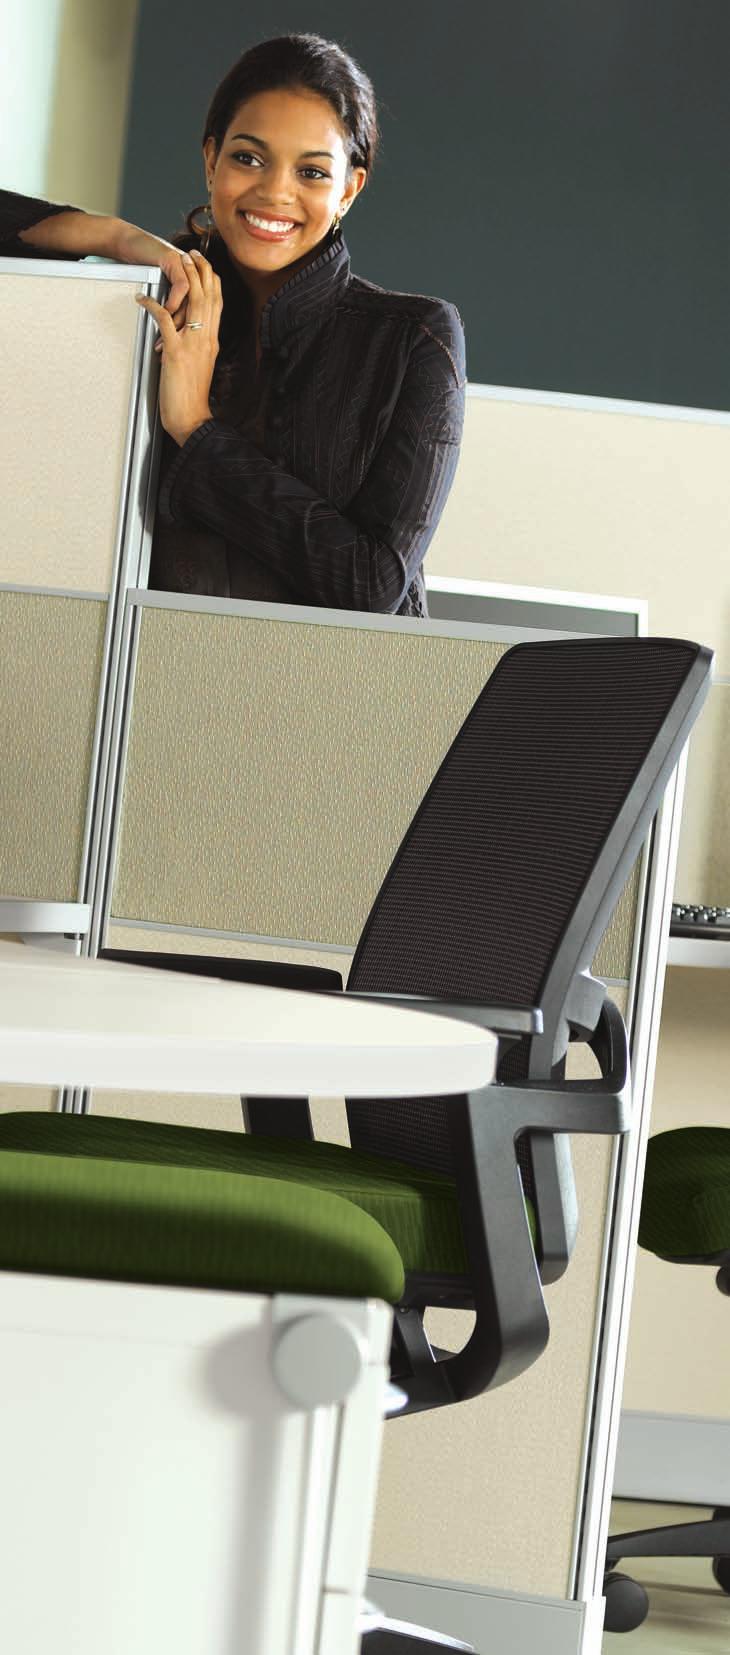 Products, materials, and finishes SHOWN: Front A: F 3 mid-back work chair with ilira-stretch mesh back in Black.